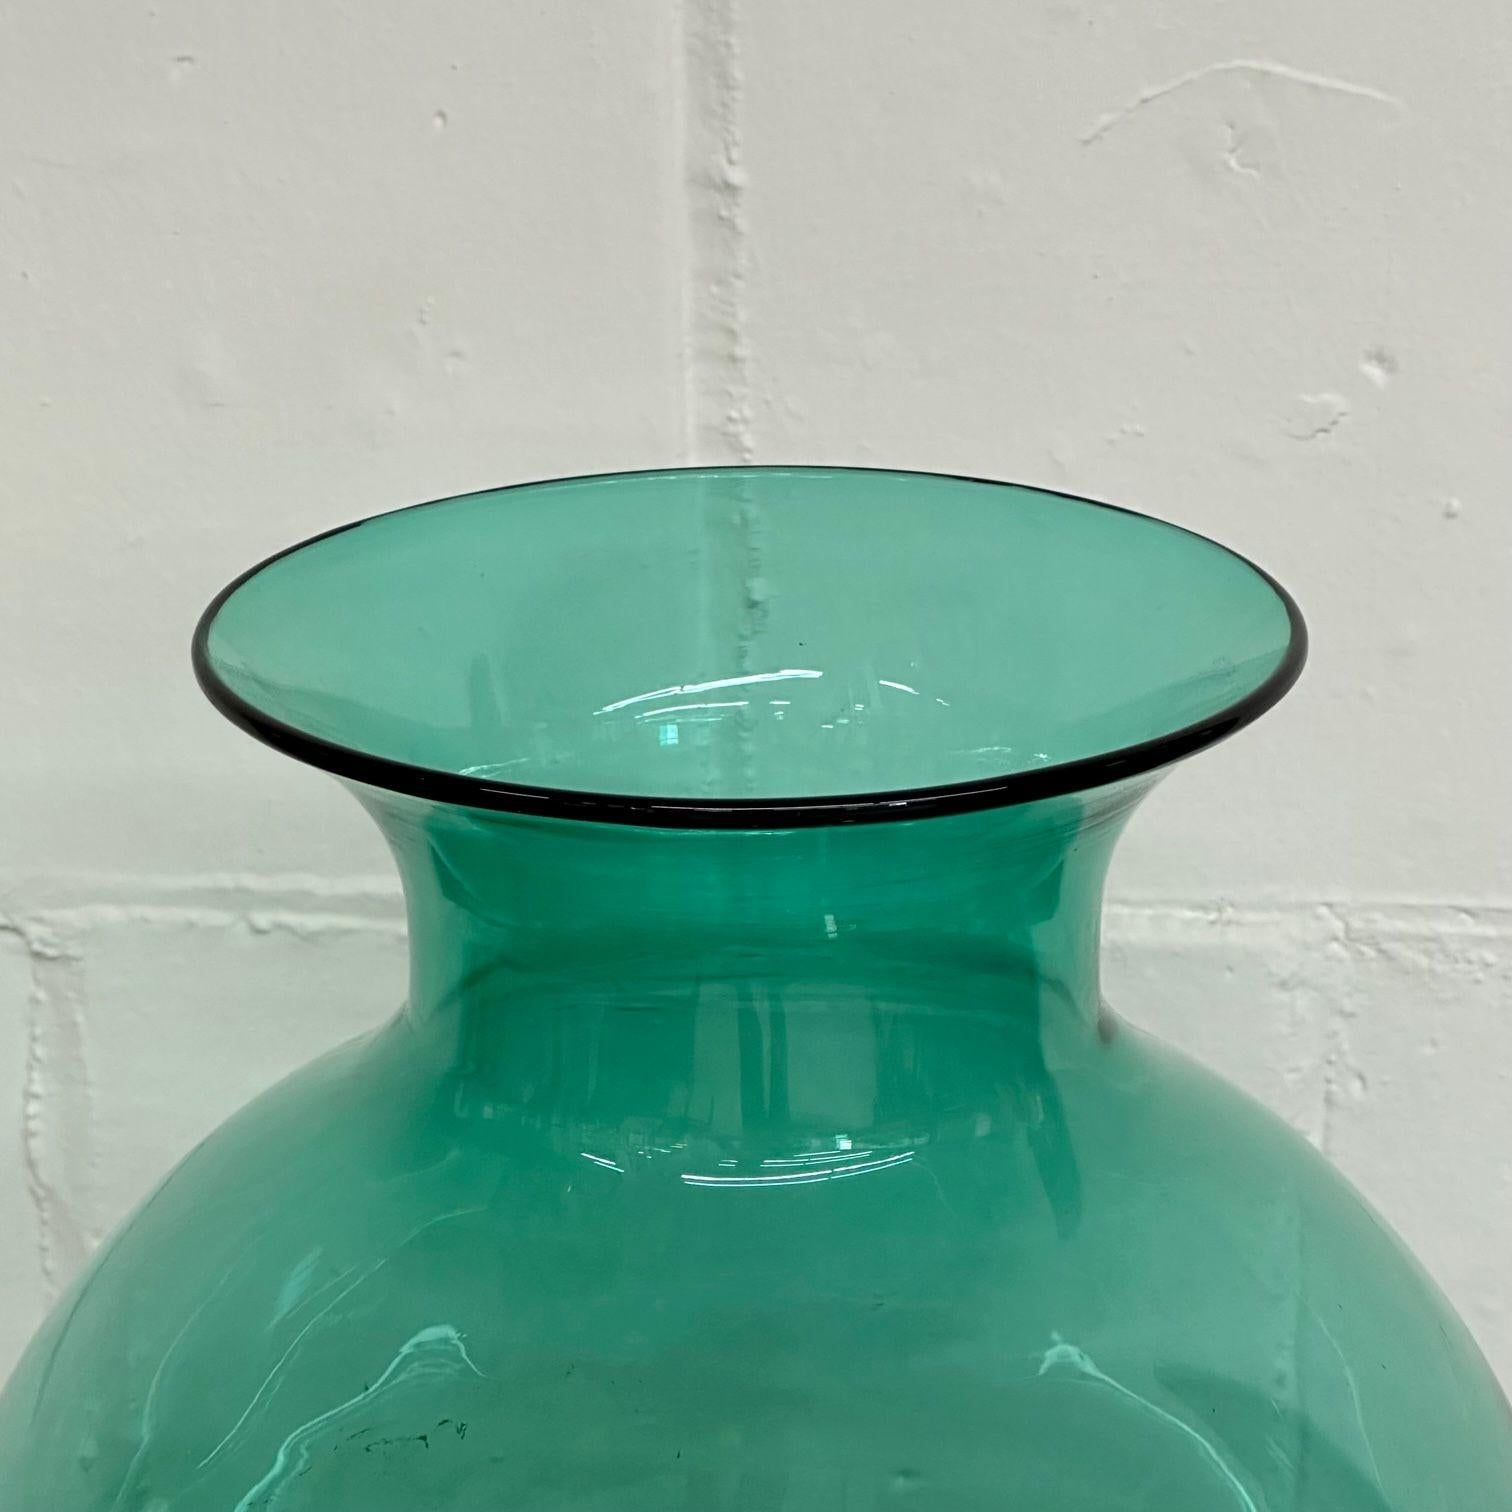 Blown Glass Large Mid-Century Modern Handblown Glass Turquoise Table Vase / Vessel by Blenko For Sale